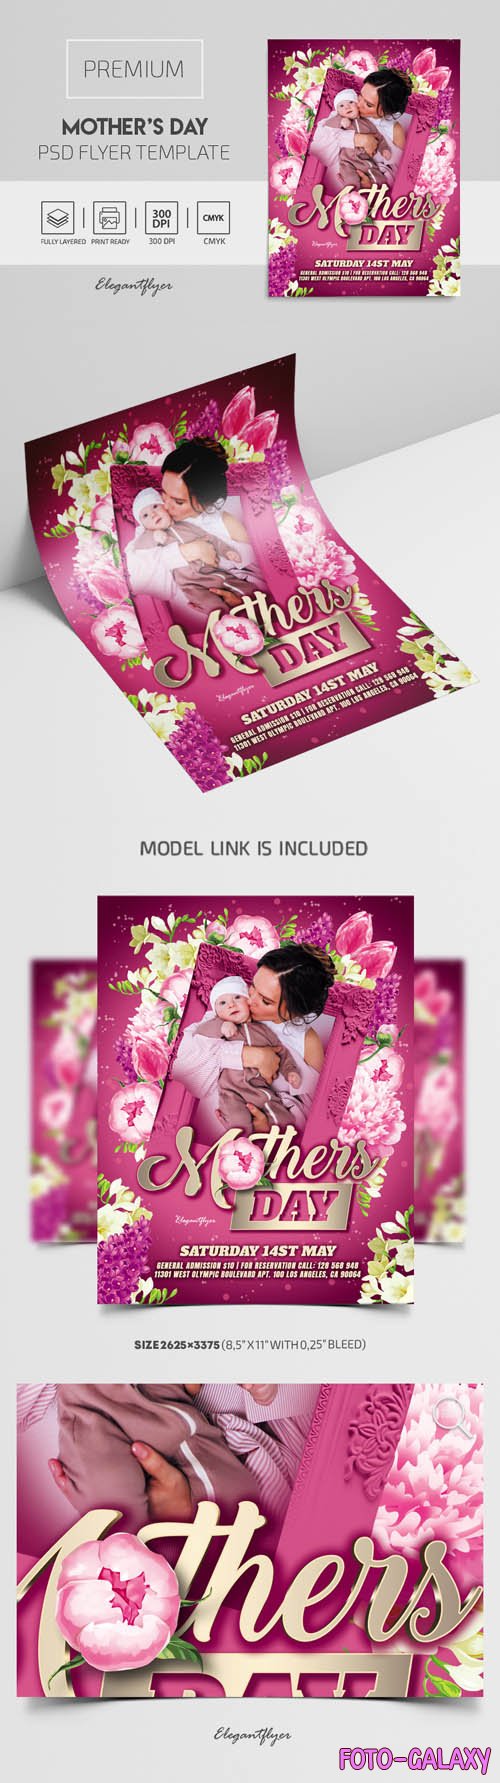 Mothers Day Premium PSD Flyer Template